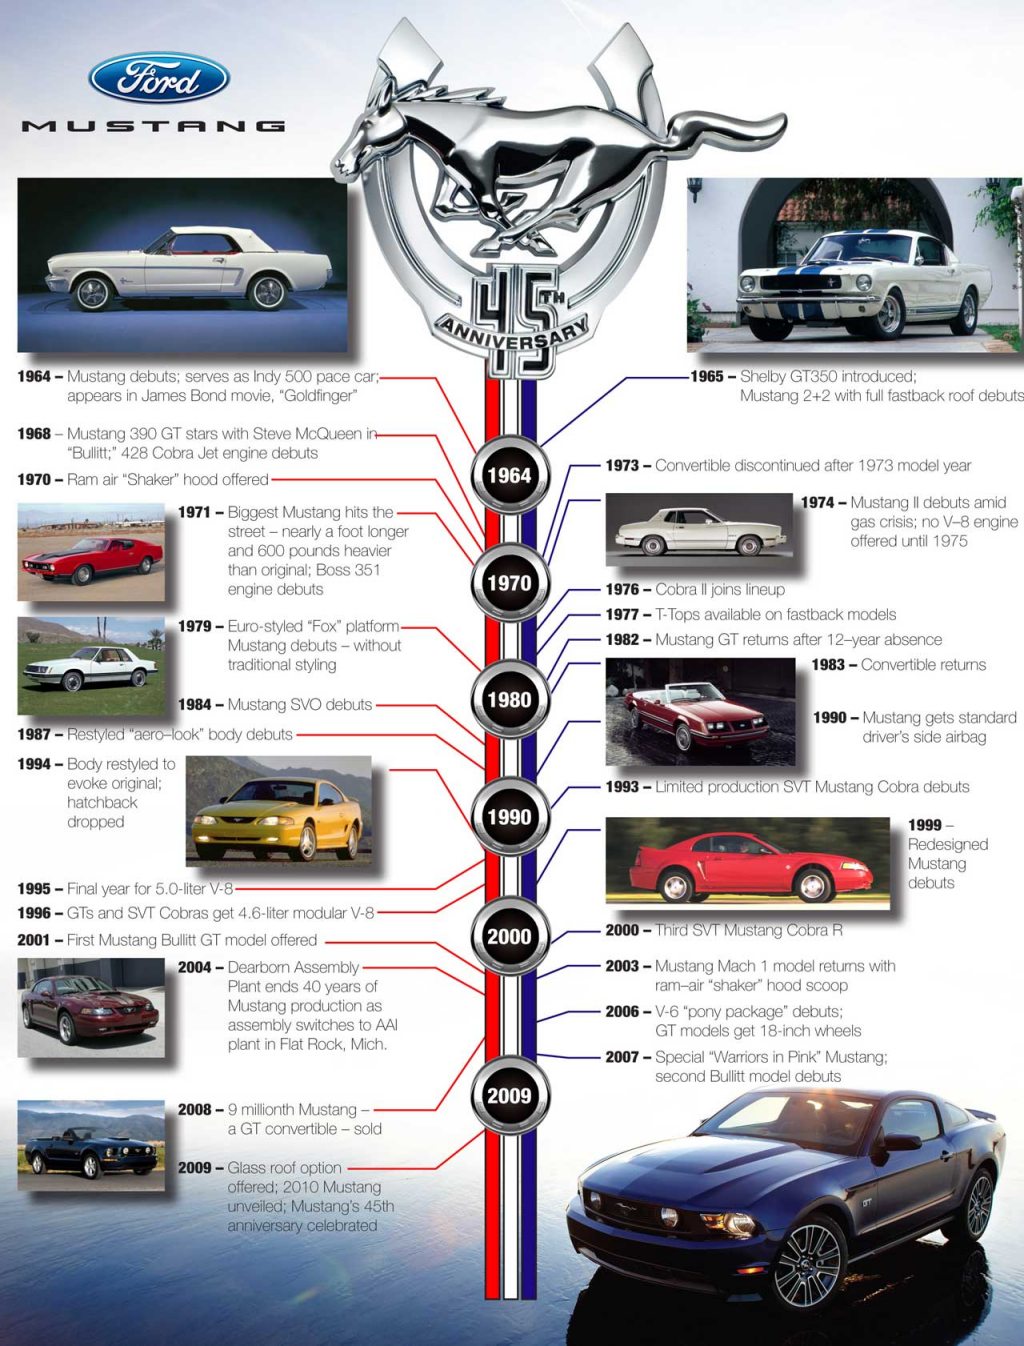 Ford Mustang history over 45 years